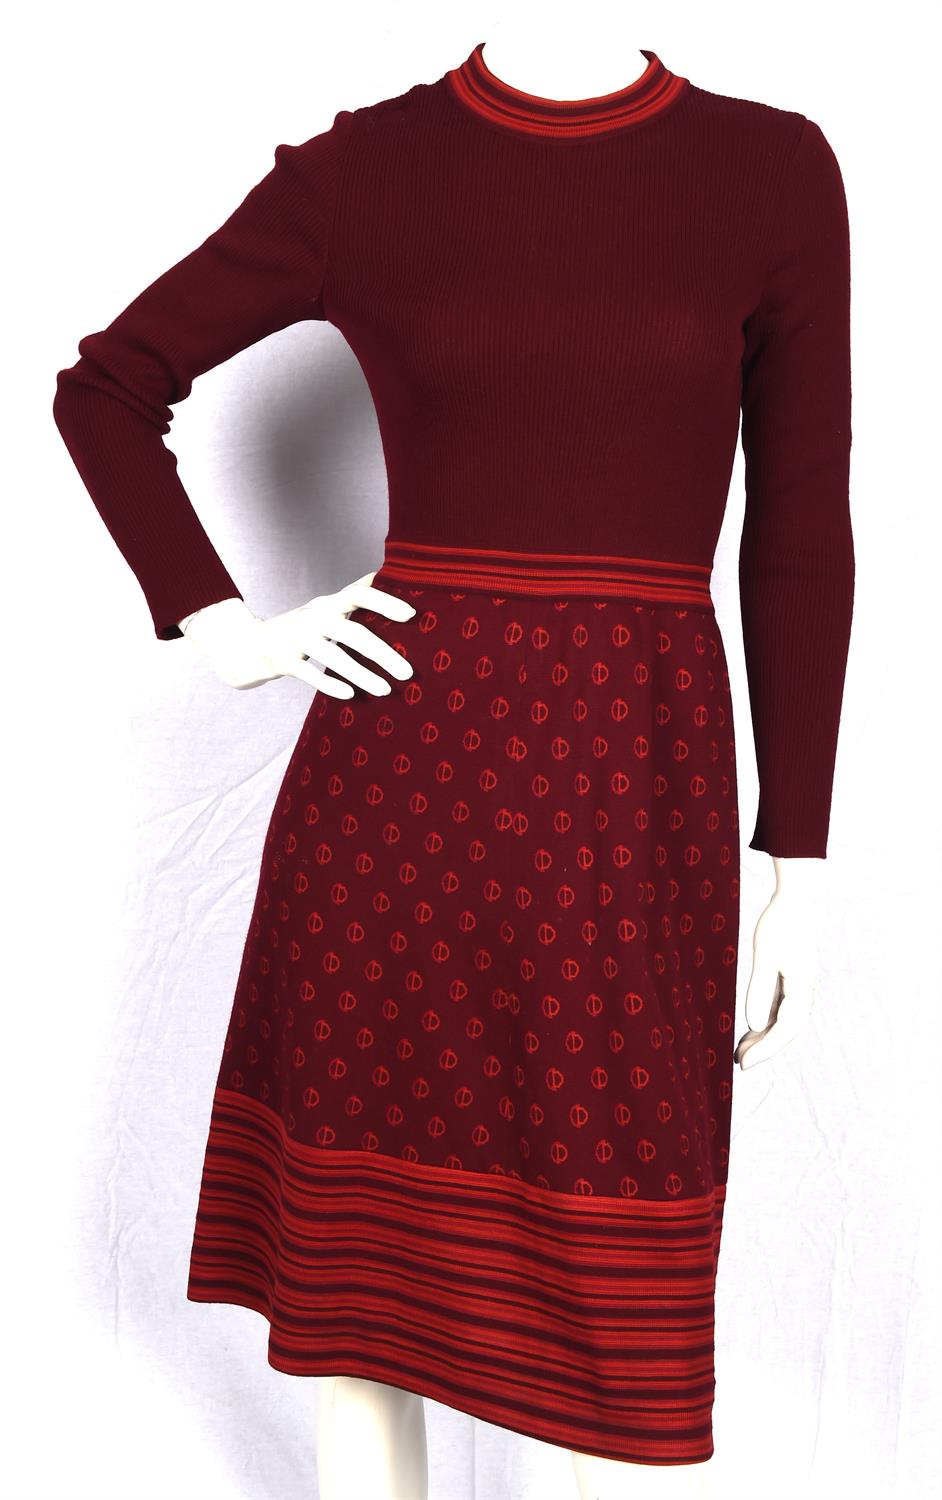 CHRISTIAN DIOR DIORLING 1970s knitted wool dress in burgundy and orange. Fits UK10 * CHRISTIAN DIOR